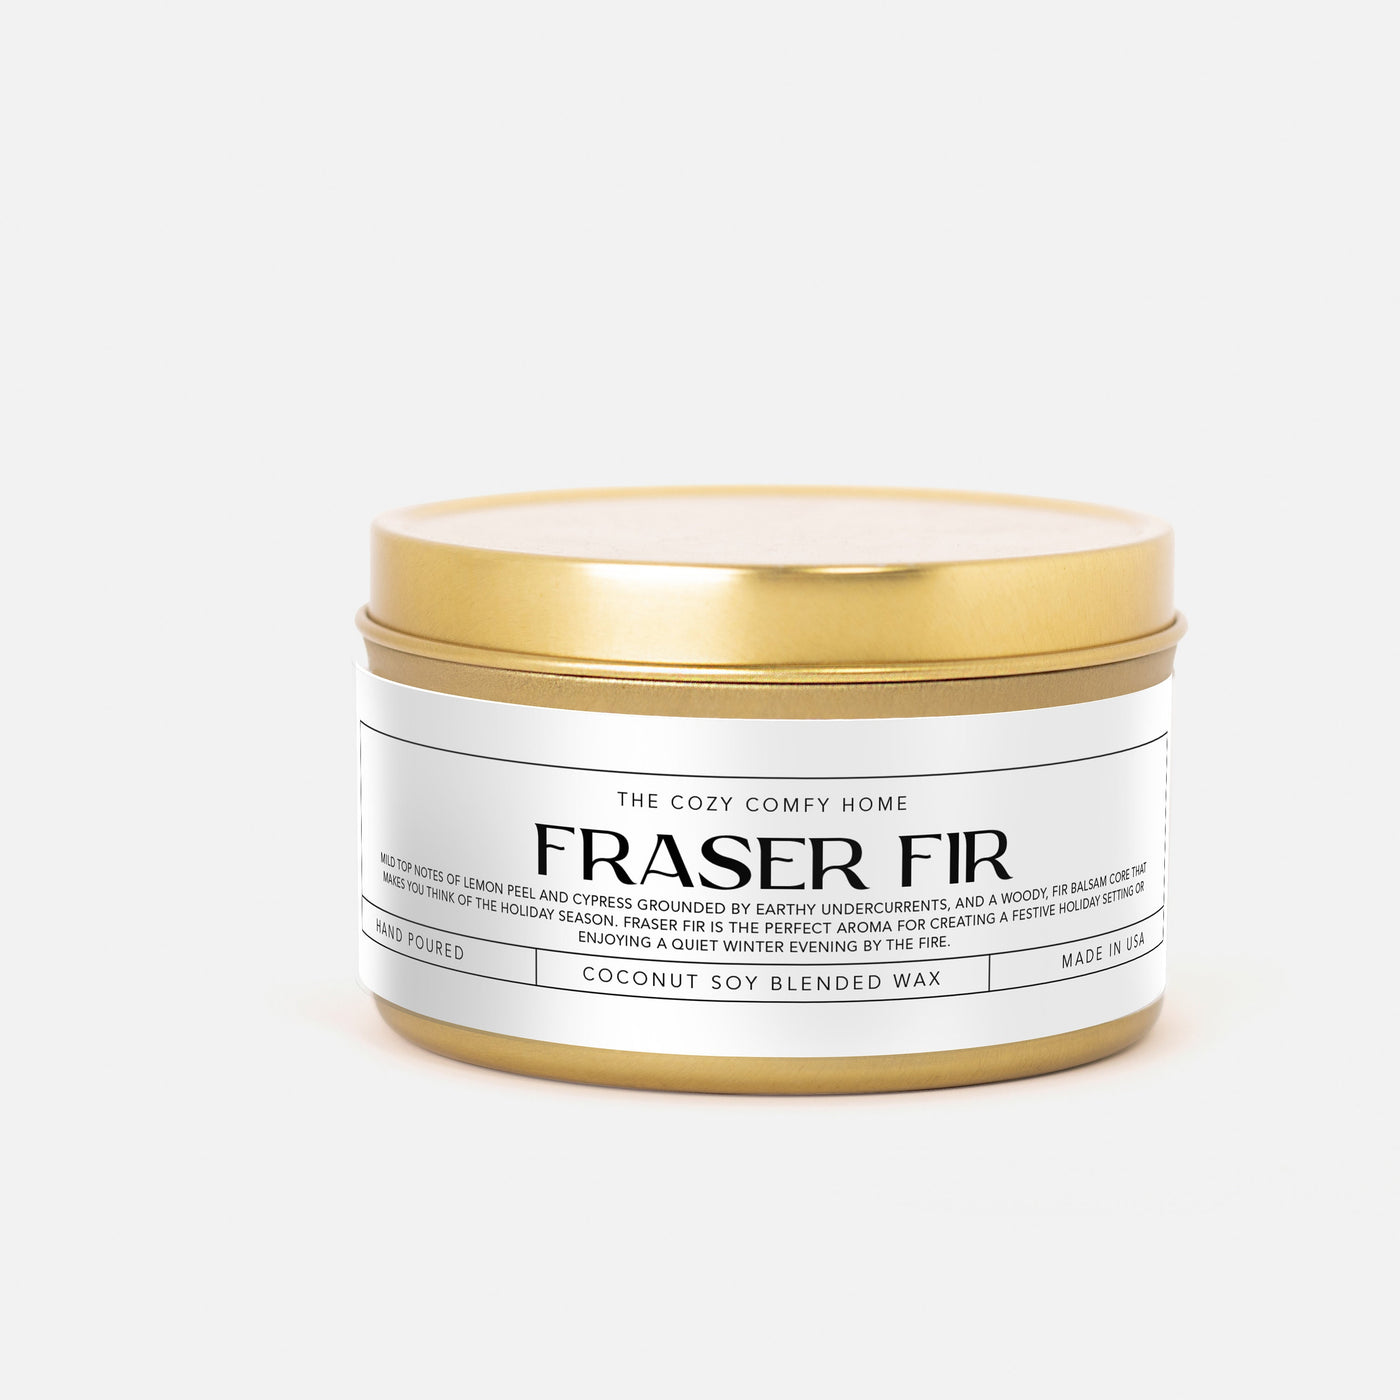 Fraser Fir hand poured candle, Scented Vegan Candle, 4 oz or 8 oz coconut soy wax tin candle, Gold Silver or Black, Gift for her